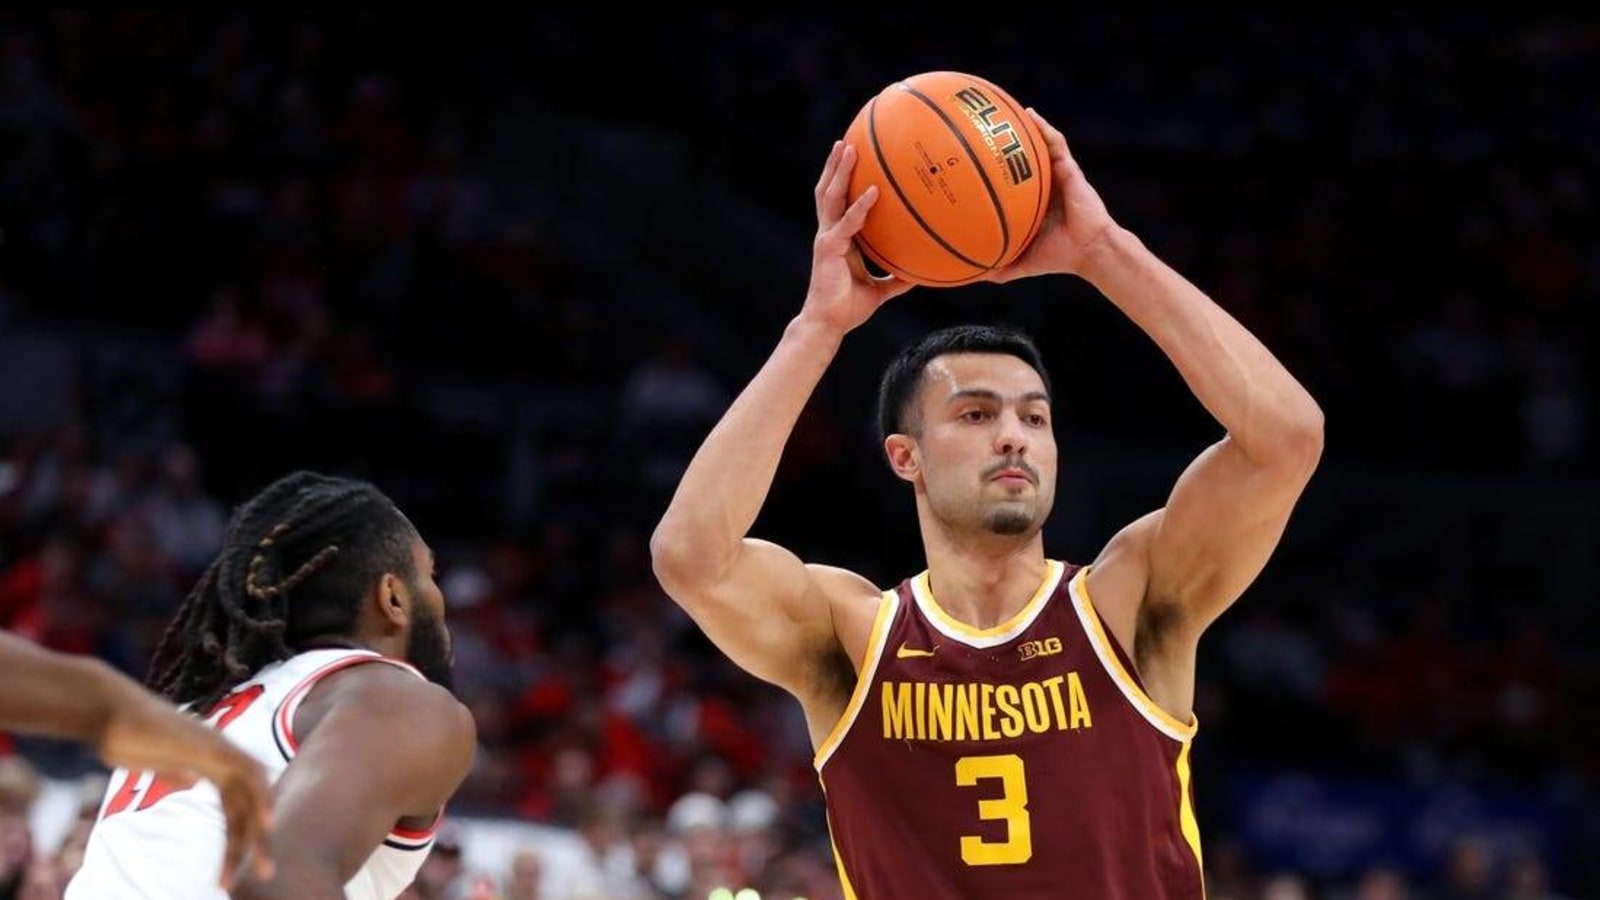 Minnesota&#39;s potent attack faces Maryland&#39;s stingy defense